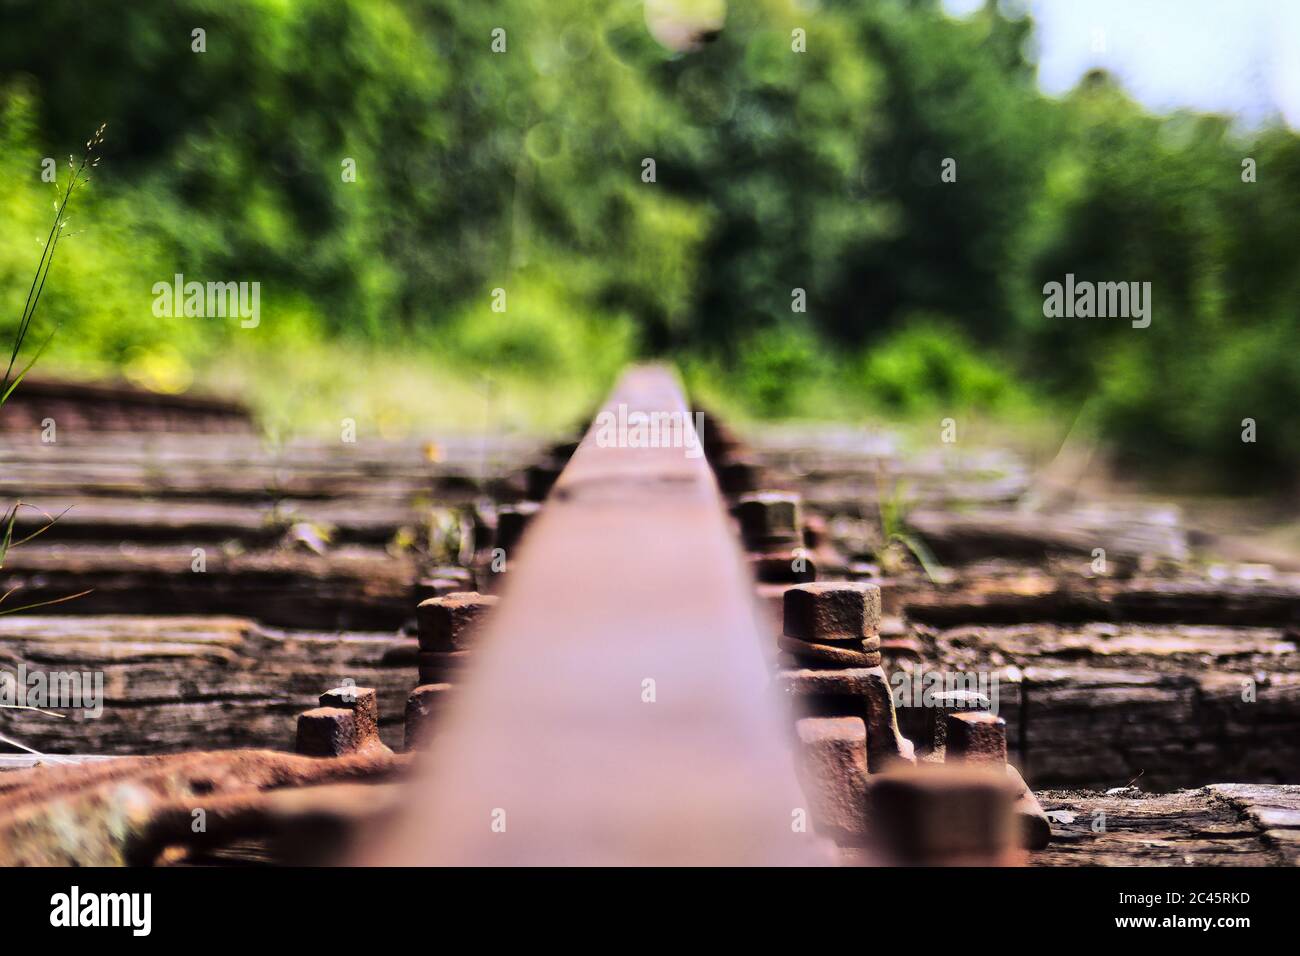 Wooden rail of rail with rail and screws Stock Photo